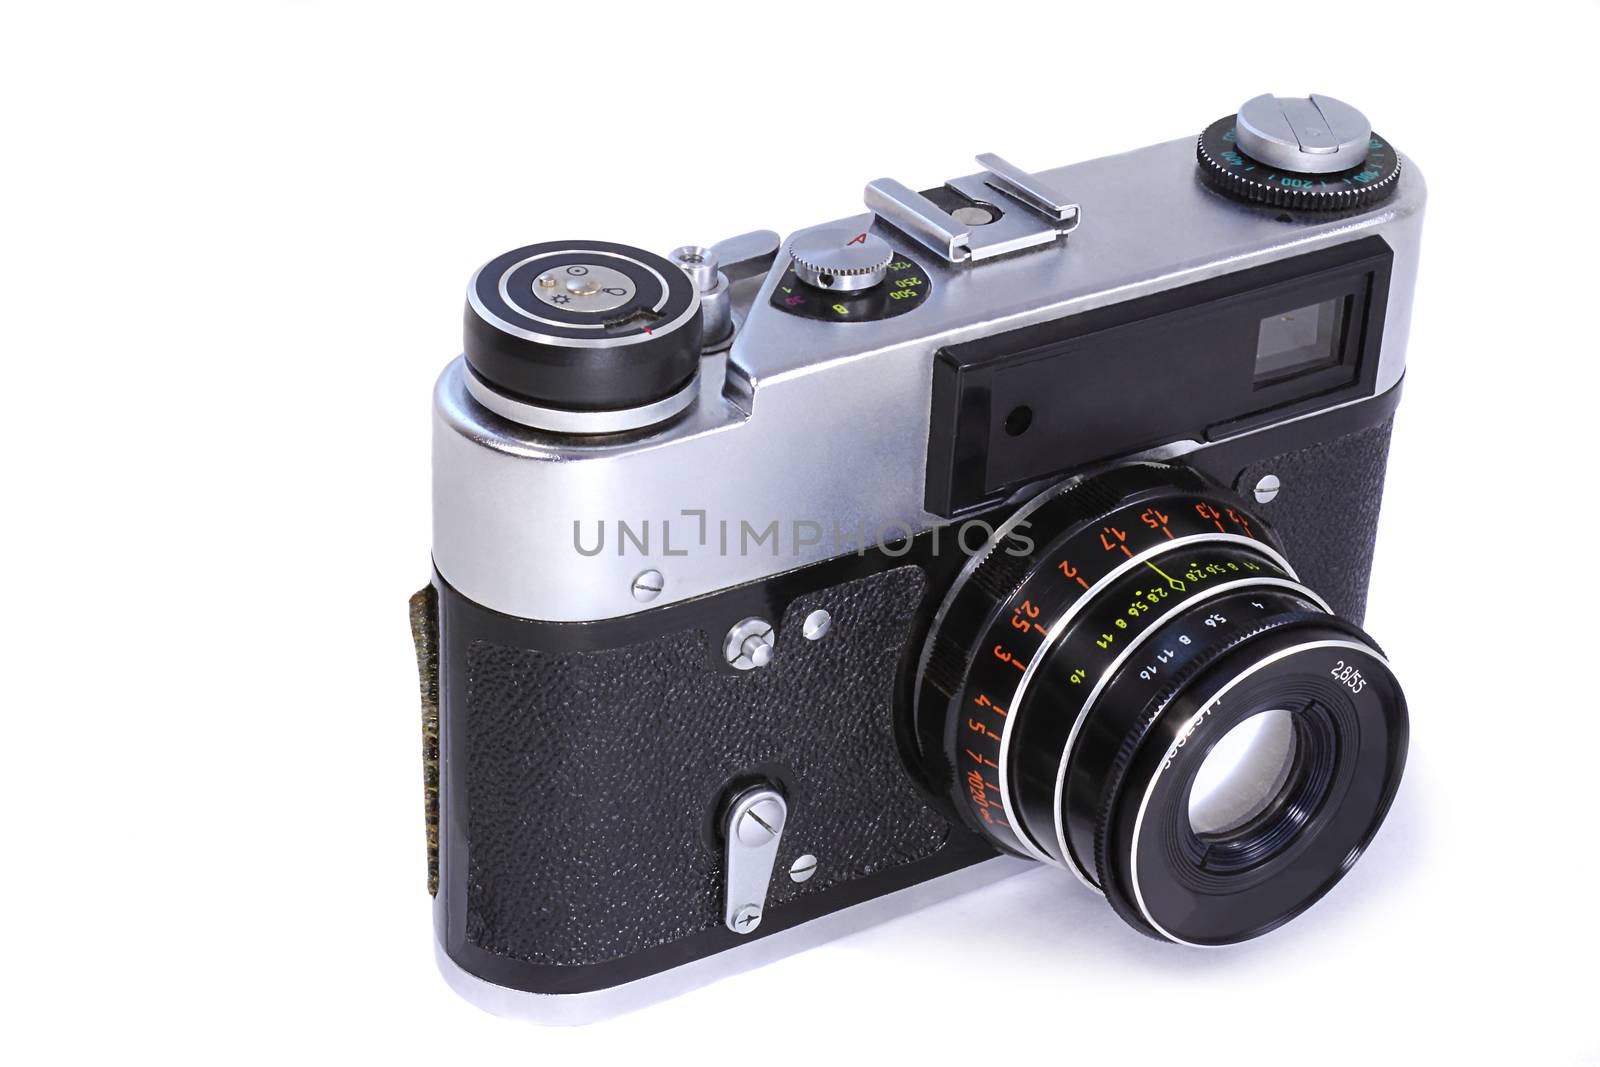 Film camera, published about twenty years ago. Presented on a white background.